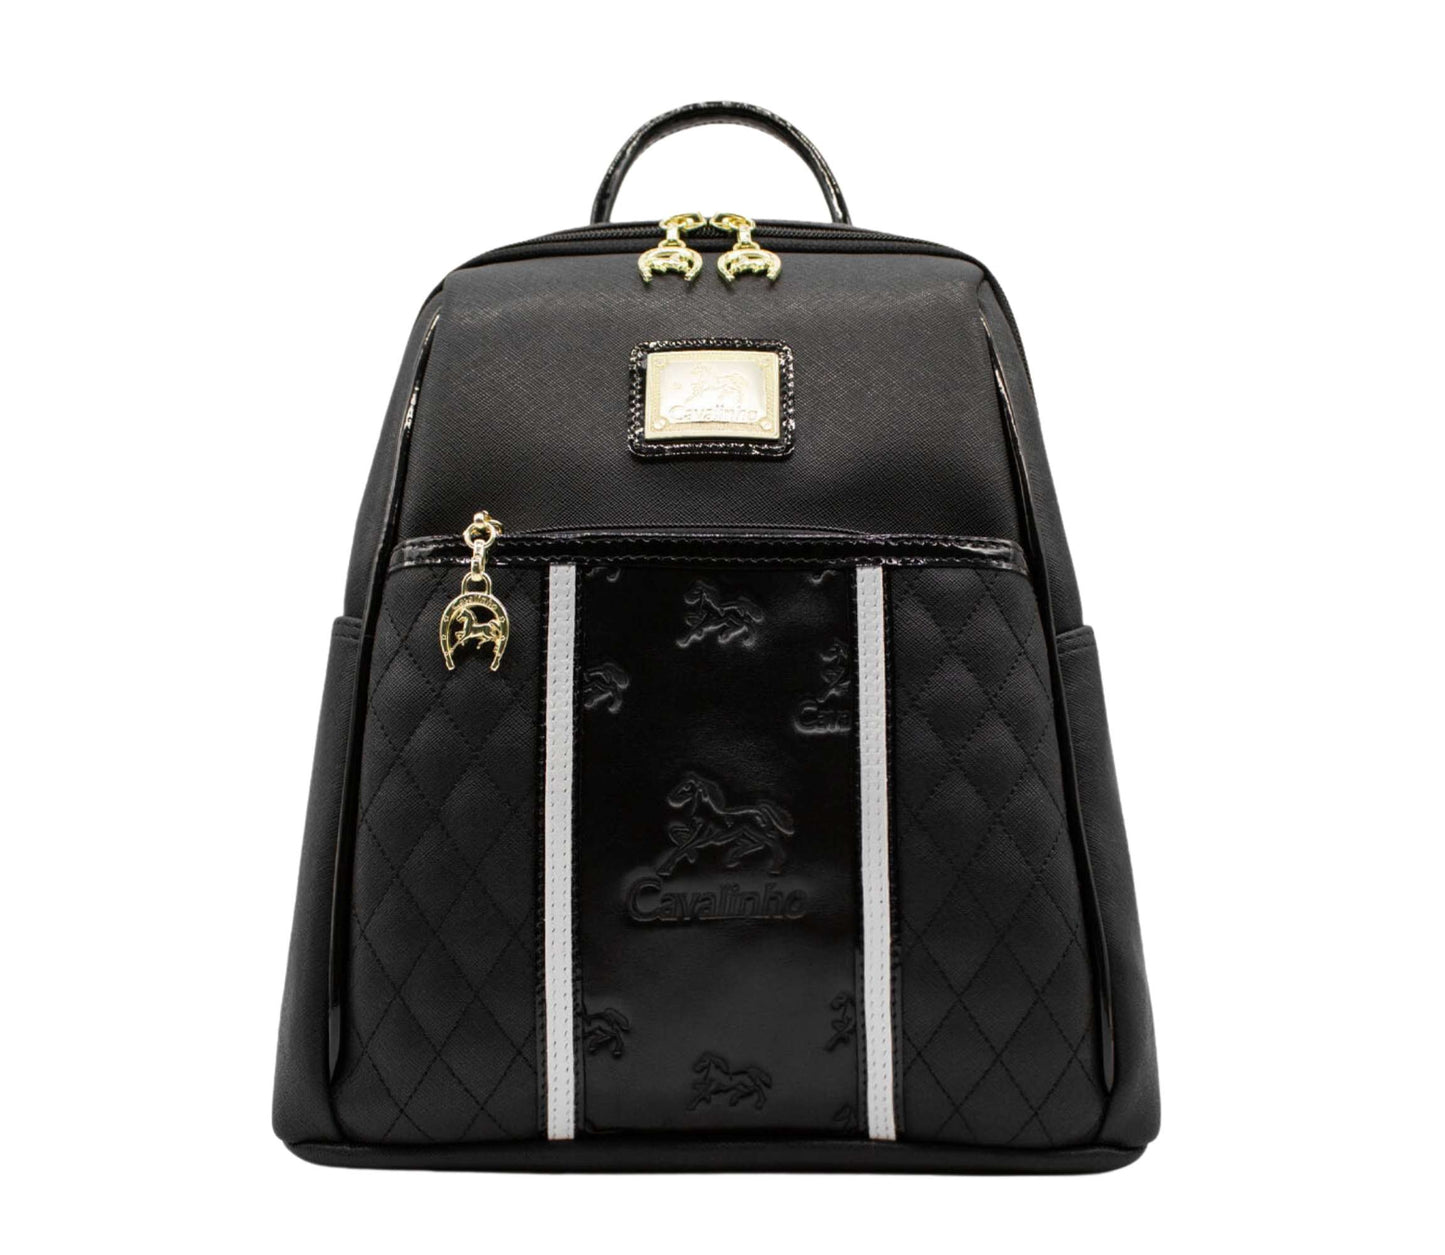 #color_ Black and White | Cavalinho Royal Backpack - Black and White - 18390249.21.99